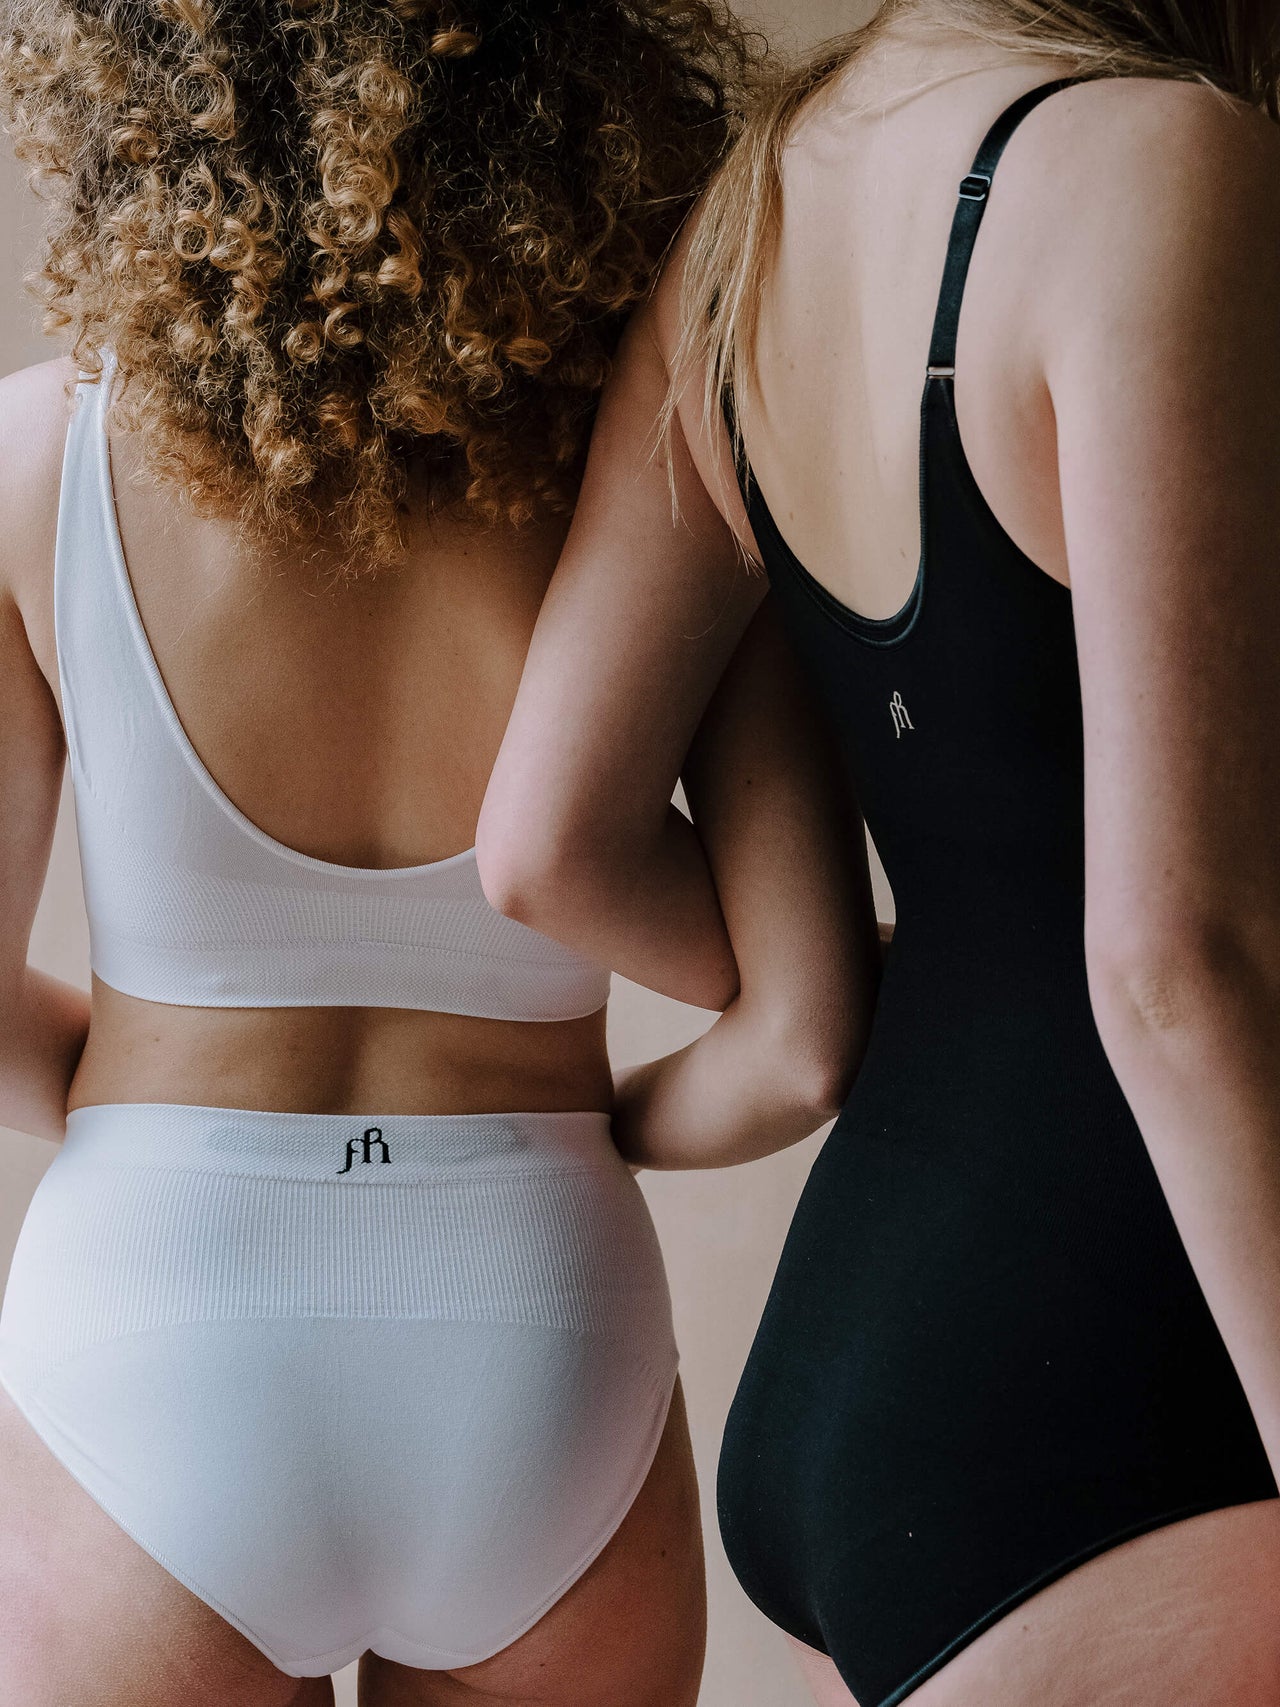 Jorgen House image of two women wearing white brief and bra and black bodysuit